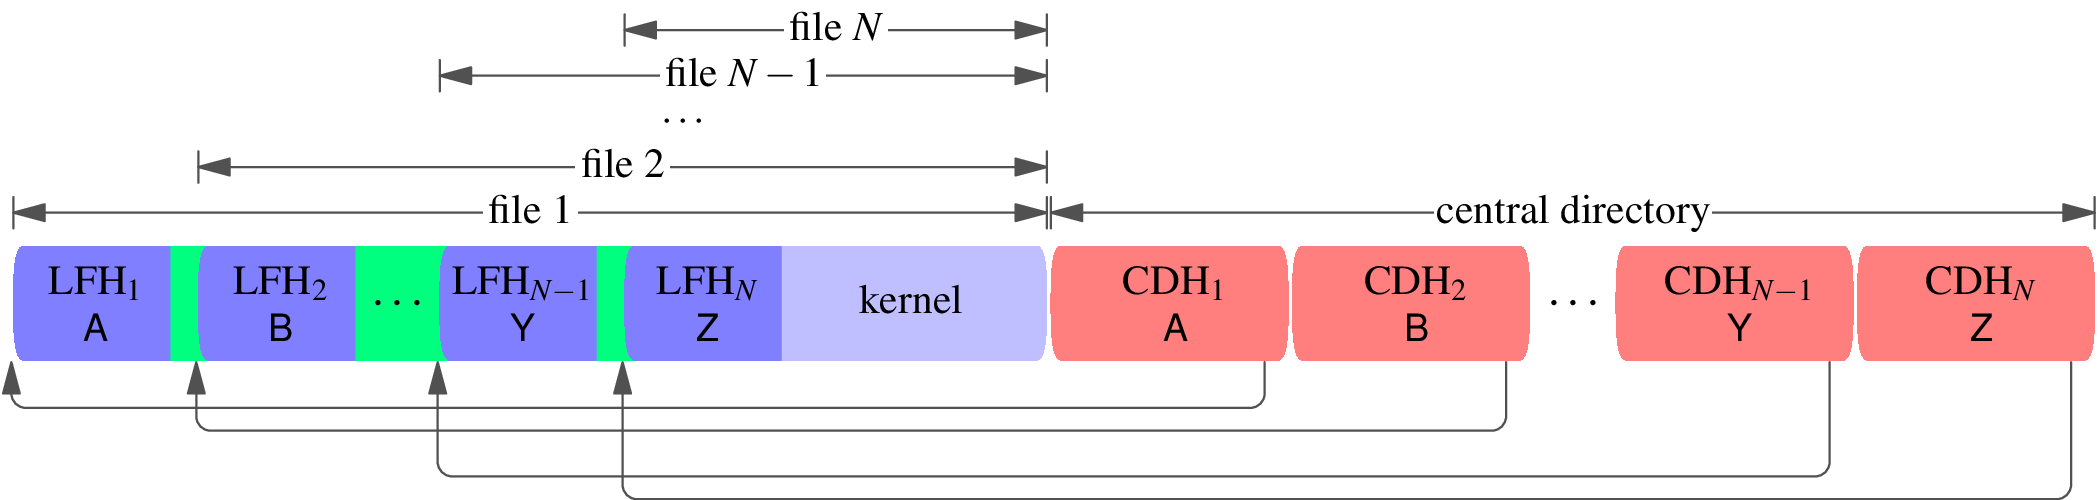 A block diagram of a zip file with quoted local file headers. The central directory header consists of central directory headers CDH[1], CDH[2], ..., CDH[N−1], CDH[N], with filenames A, B, ..., Y, Z. The central directory headers point to corresponding local file headers LFH[1], LFH[2], ..., LFH[N−1], LFH[N] with filenames A, B, ..., Y, Z. The files are drawn and labeled to show that file 1 does not end before file 2 begins; rather file 1 contains file 2, file 2 contains file 3, and so on. There is a small green-colored space between LFH[1] and LFH[2], and between LFH[2] and LFH[3], etc., to stand for quoting the following local file header using an uncompressed DEFLATE block. The file data of the final file, whose local file header is LFH[N] and whose filename is Z, does not contain any other files, only the compressed kernel.